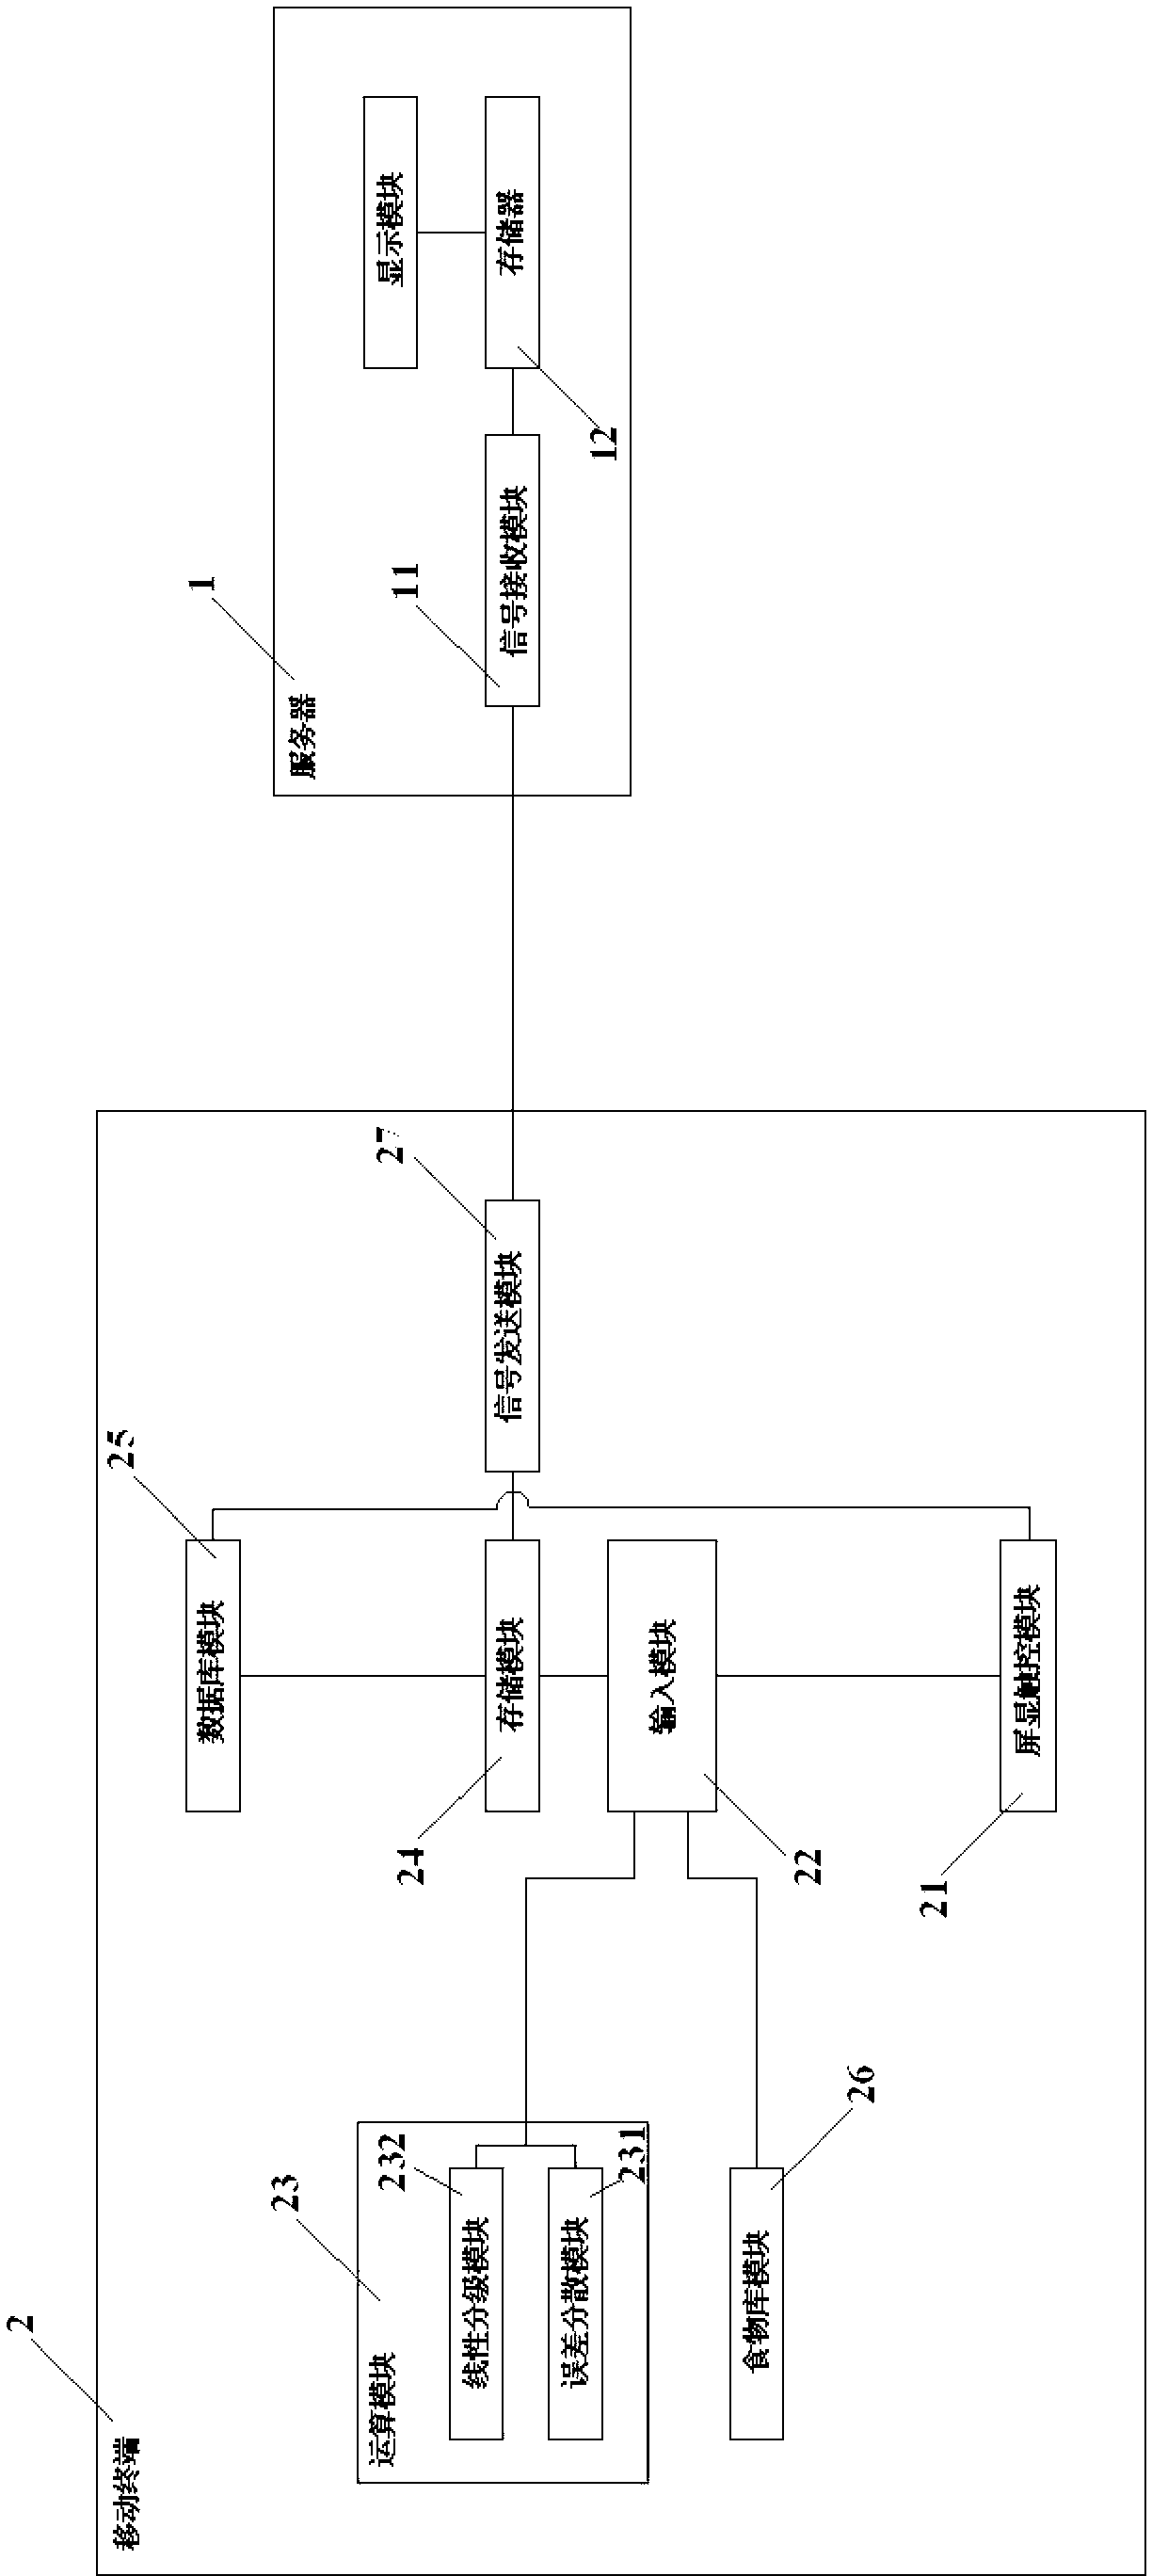 Movable dietary investigation system and use method thereof